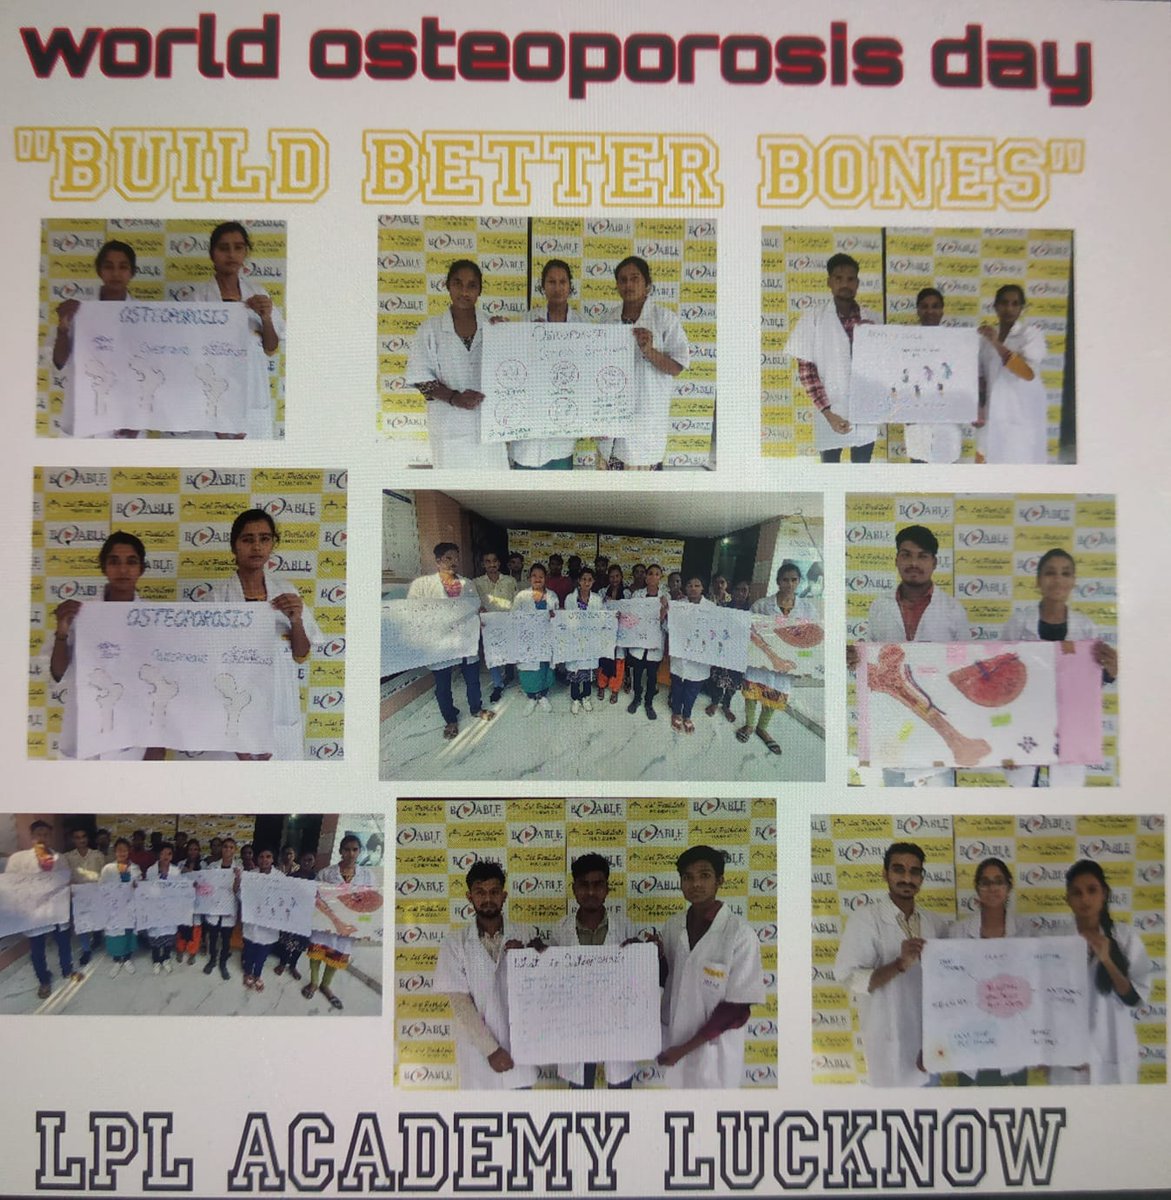 Students of our #Phlebotomy #SkillBuilding Centre in Lucknow celebrated #WorldOsteoporosisDay  on October 20 through chart presentation. The theme of 2023 was “Build Better Bones.”